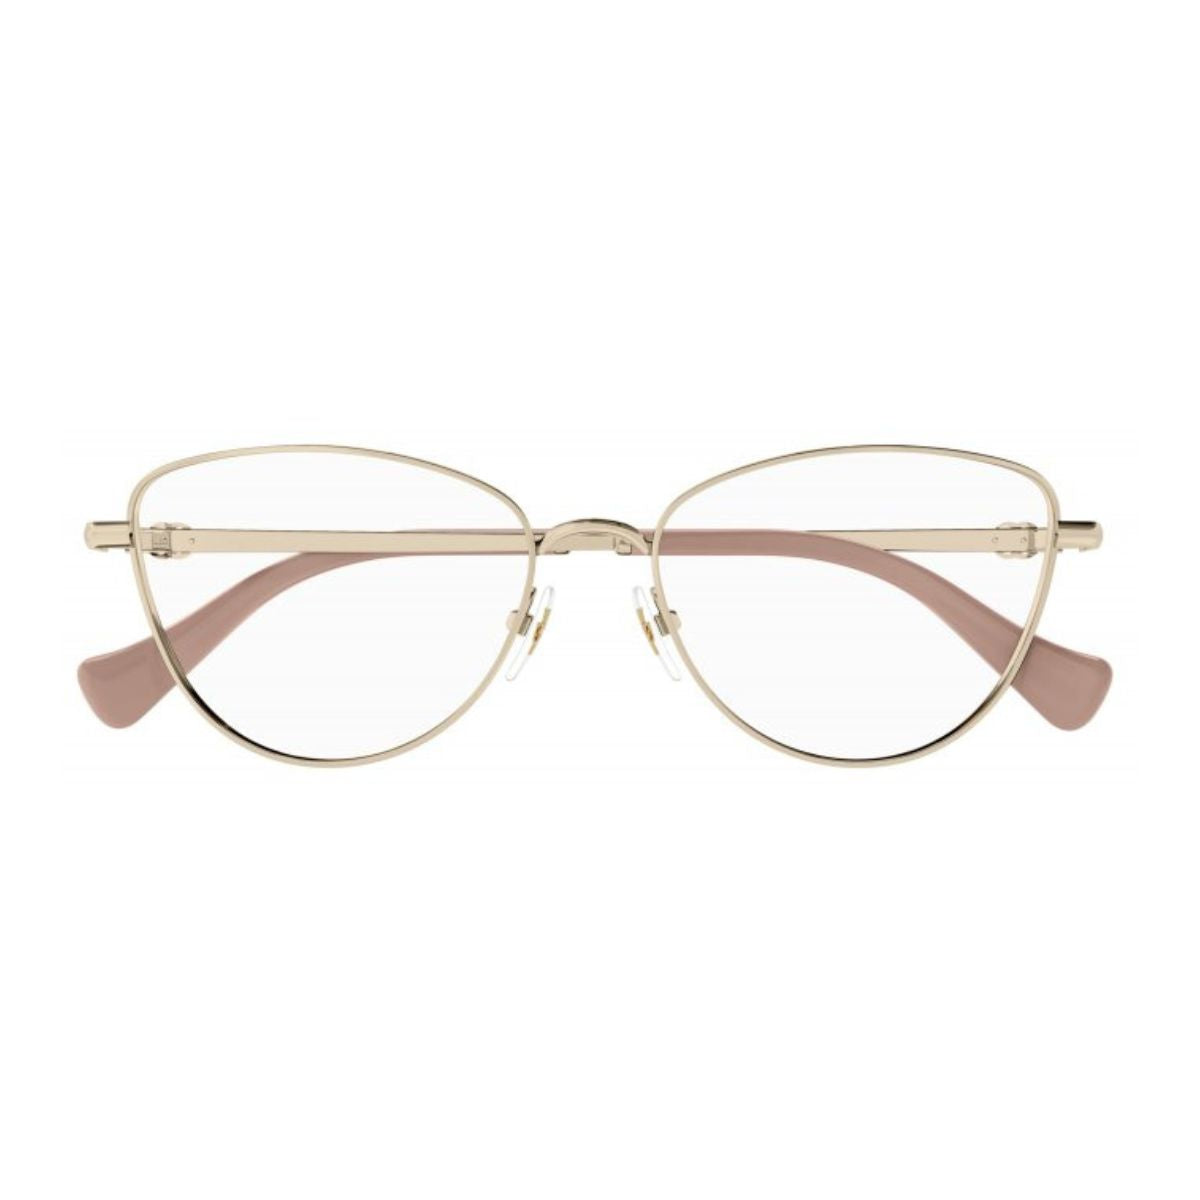 " Gucci GG1595O 002 stylish frame for women's online at optorium"